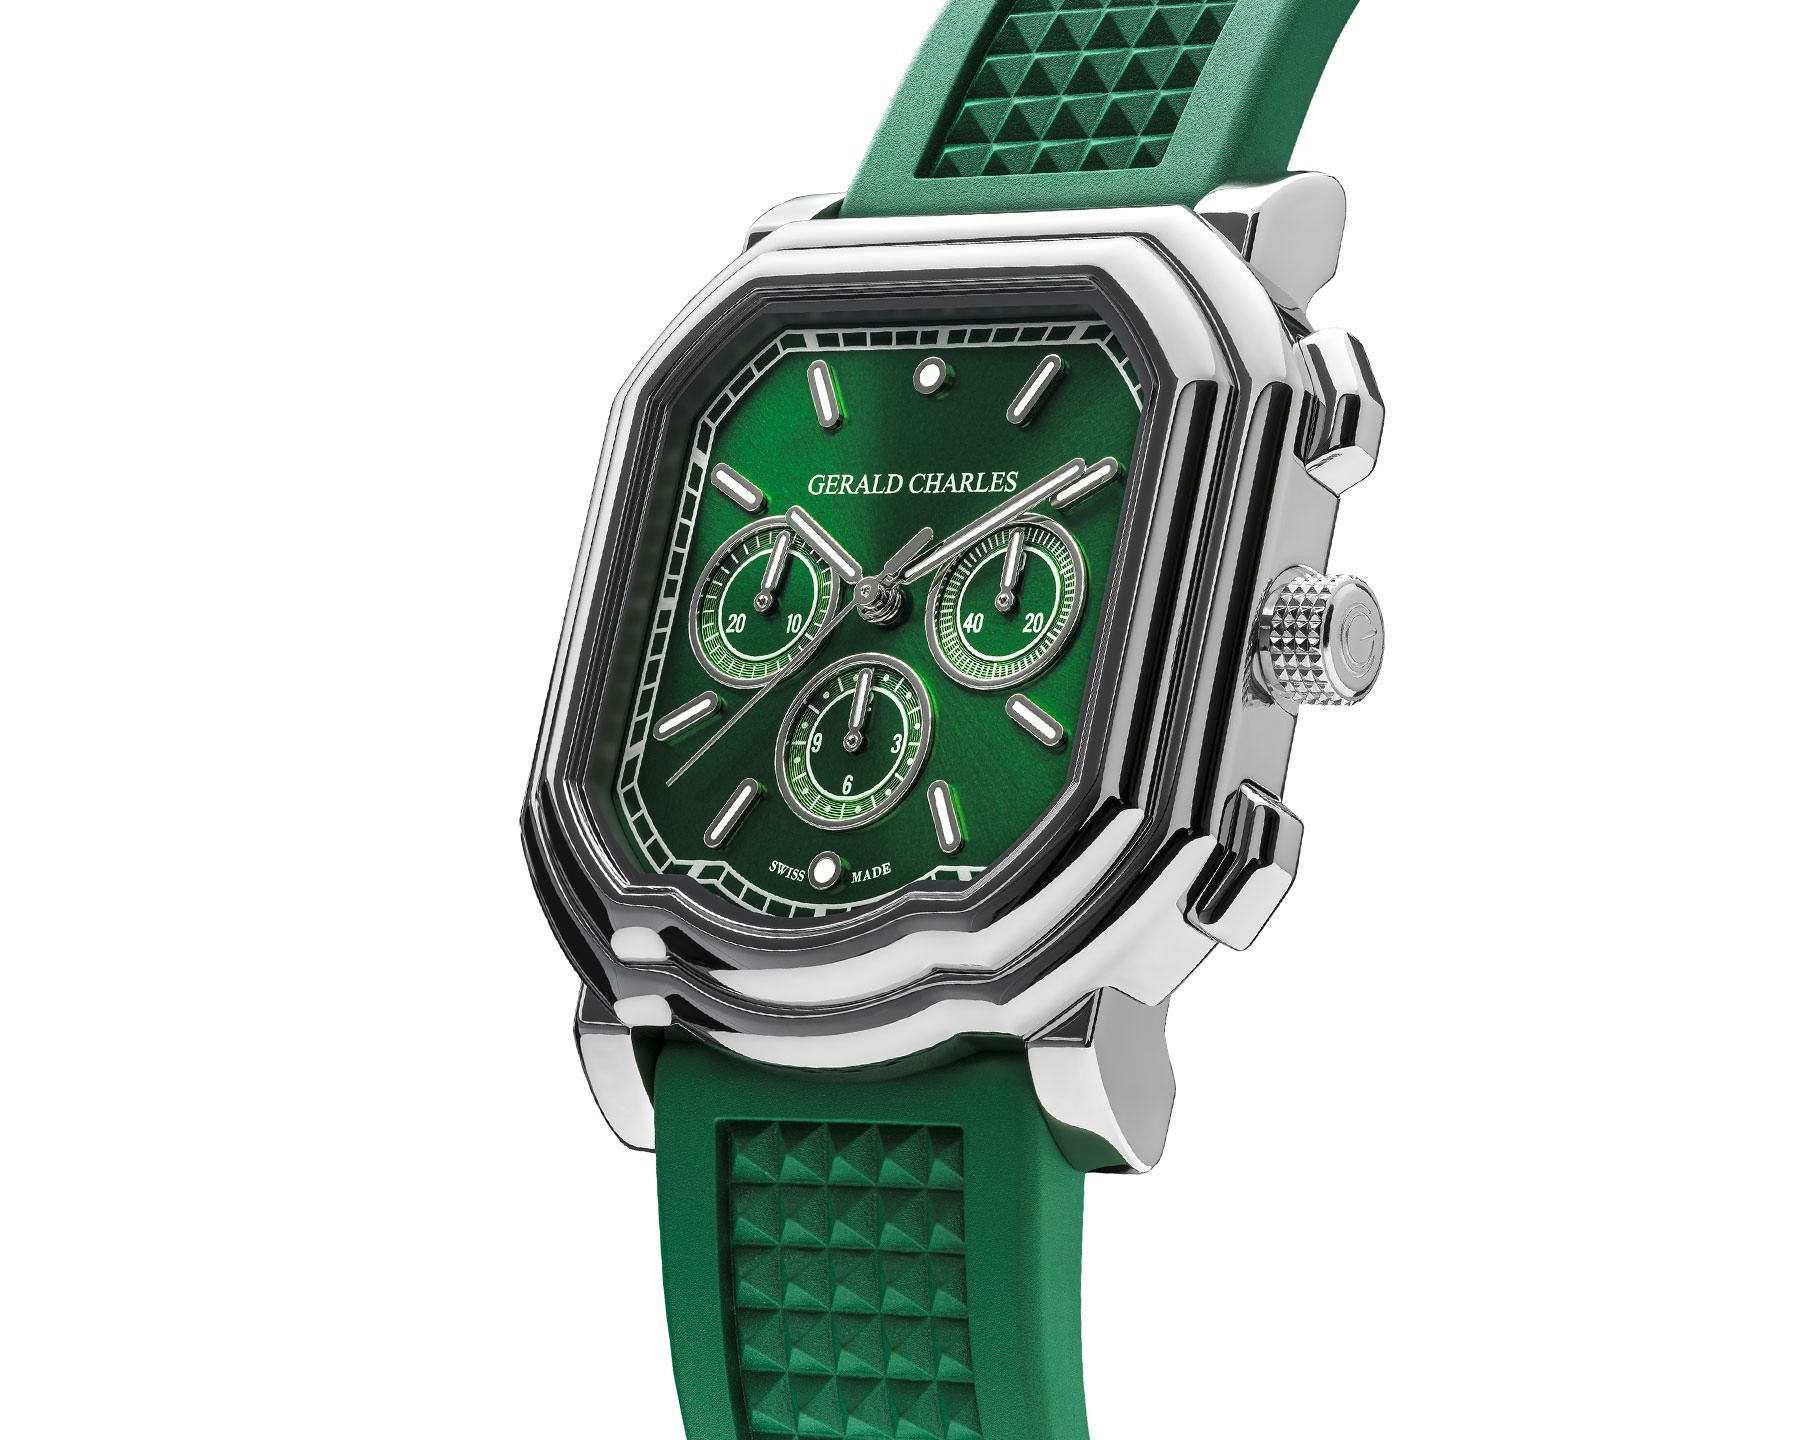 Gerald Charles Maestro Maestro 3.0 Chronograph Green Dial 41.7 mm Automatic Watch For Unisex - 2